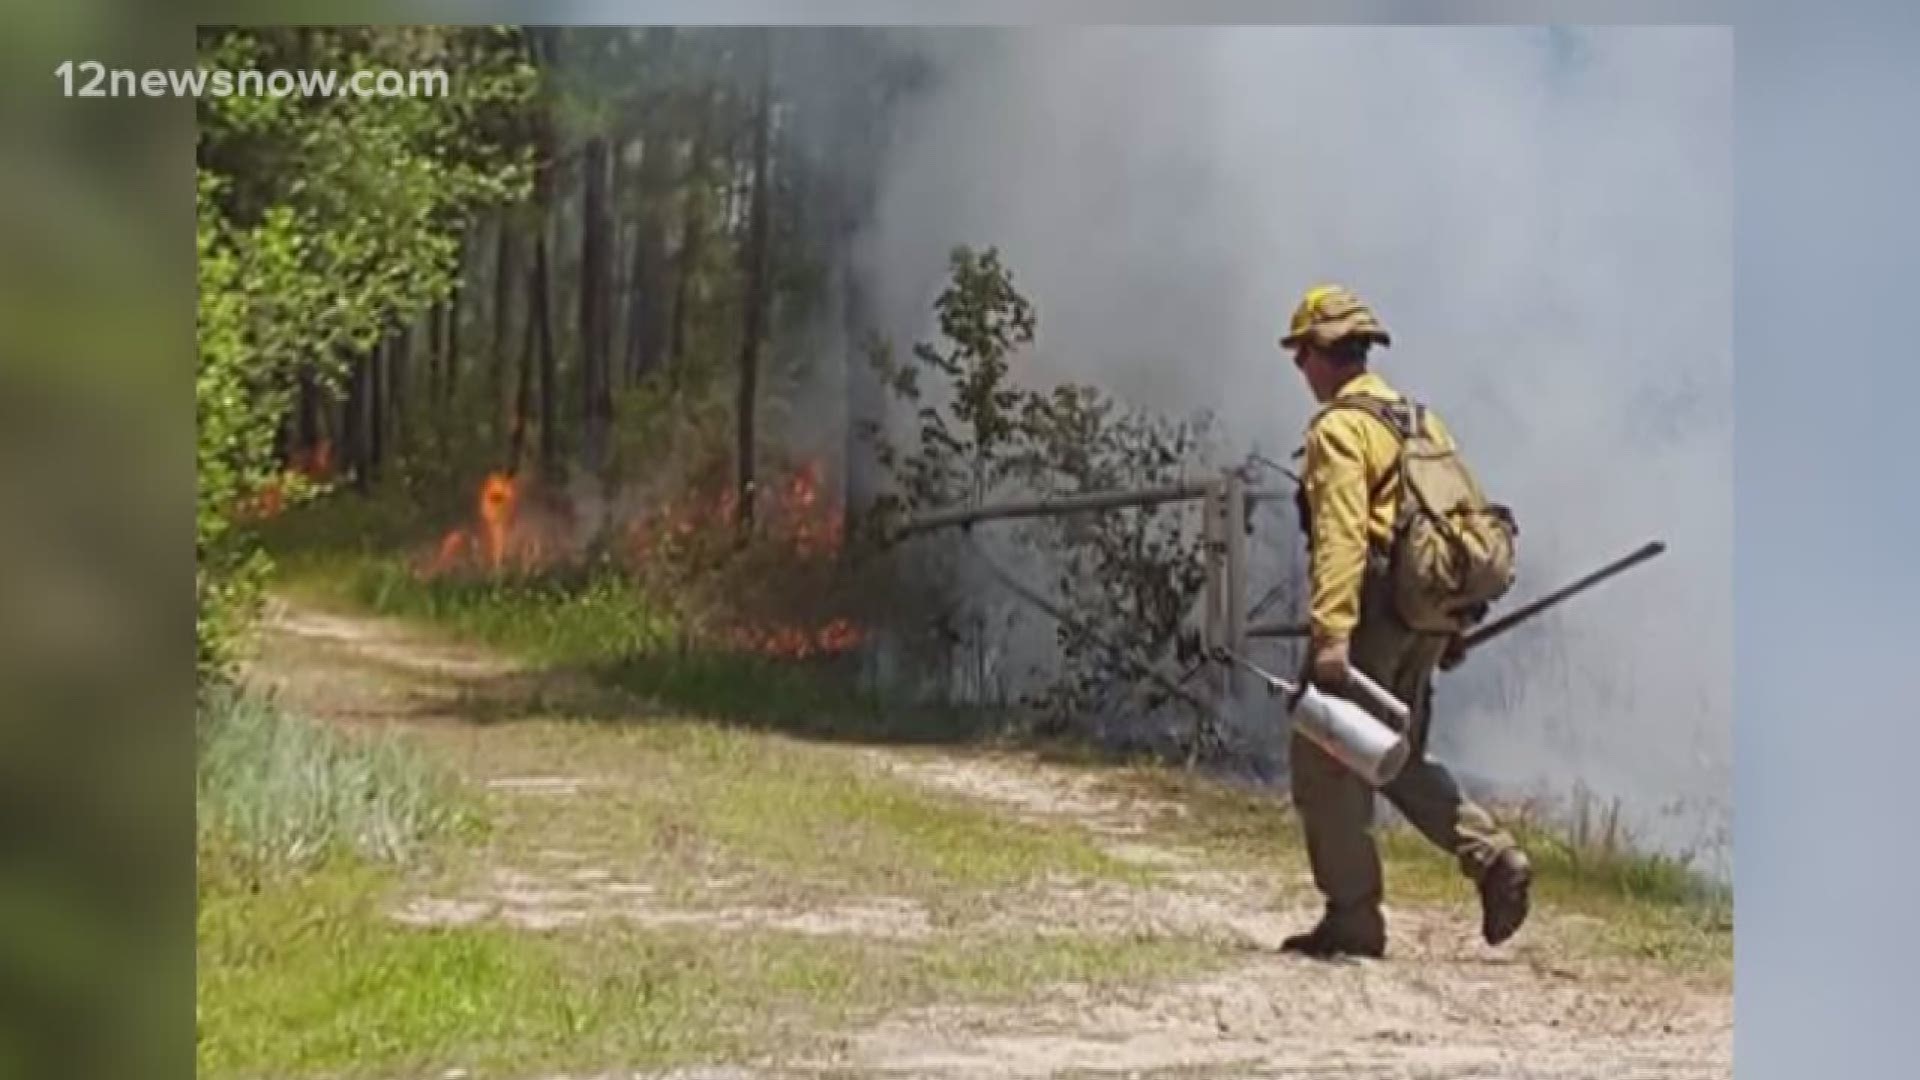 The national parks service burned about 90 acres in 6 hours.